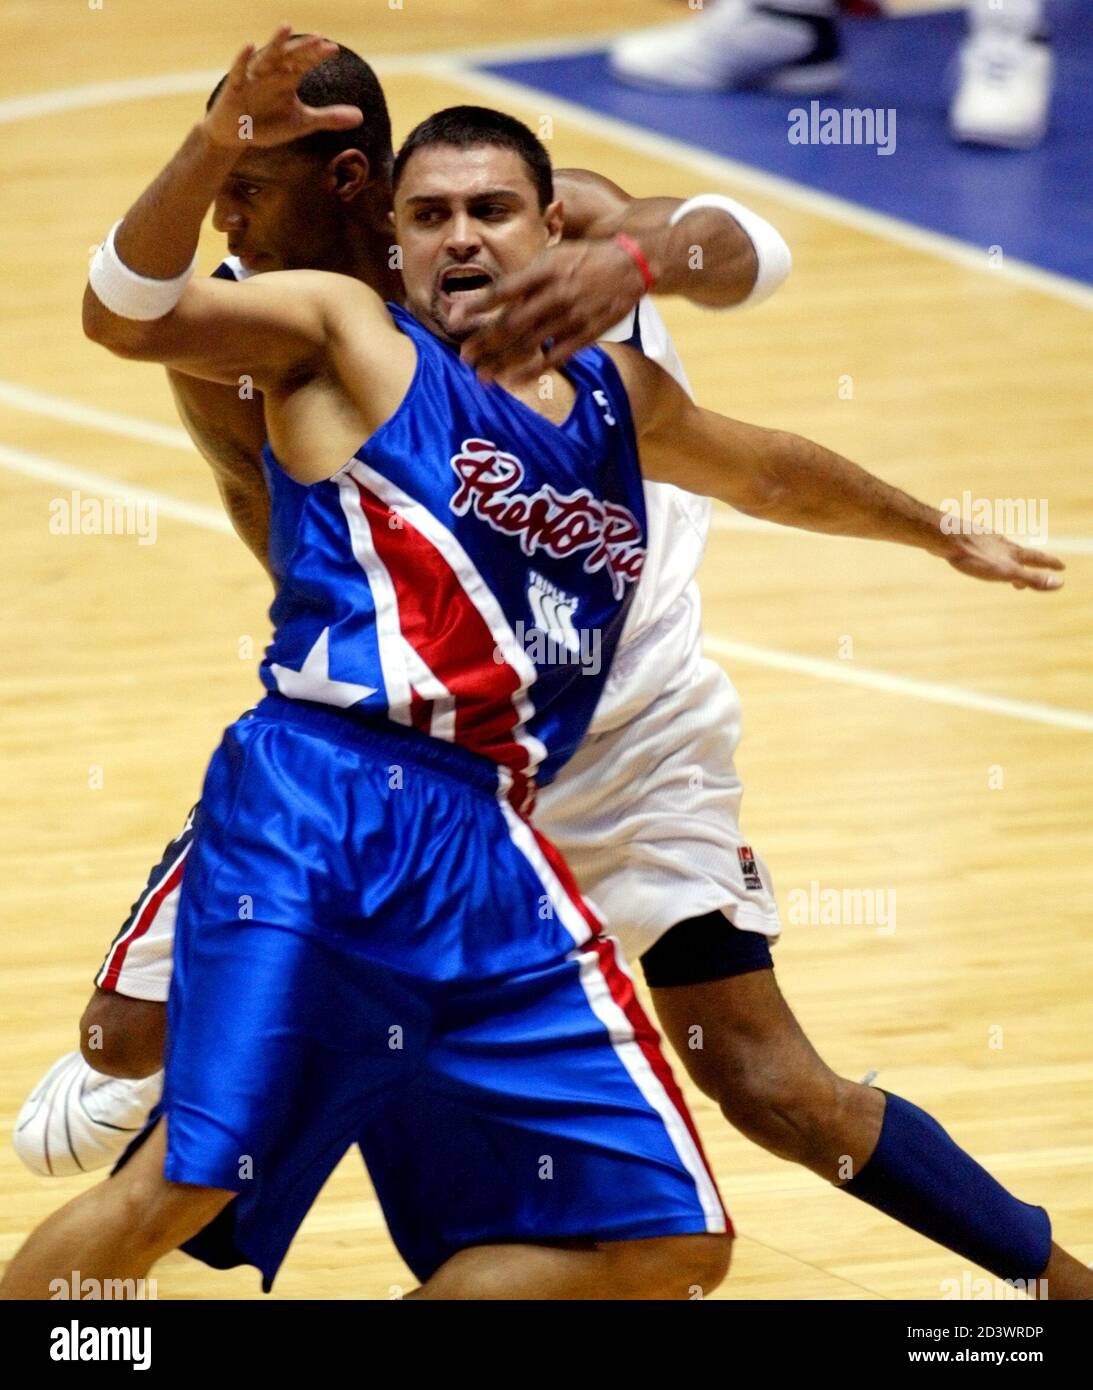 Puerto Rican guard Eddie Casiano (San Antonio Spurs) (R) is roughed up by USA guard Tracy McGrady (Orlando Magic) during first half action in the semifinal round of the 2003 FIBA Americas Men's Olympic Qualifying Tournament in San Juan, Puerto Rico, August 30, 2003. The top three teams in the tournament qualify for the 2004 Summer Olympics in Greece. REUTERS/Ana Martinez  JM Stock Photo